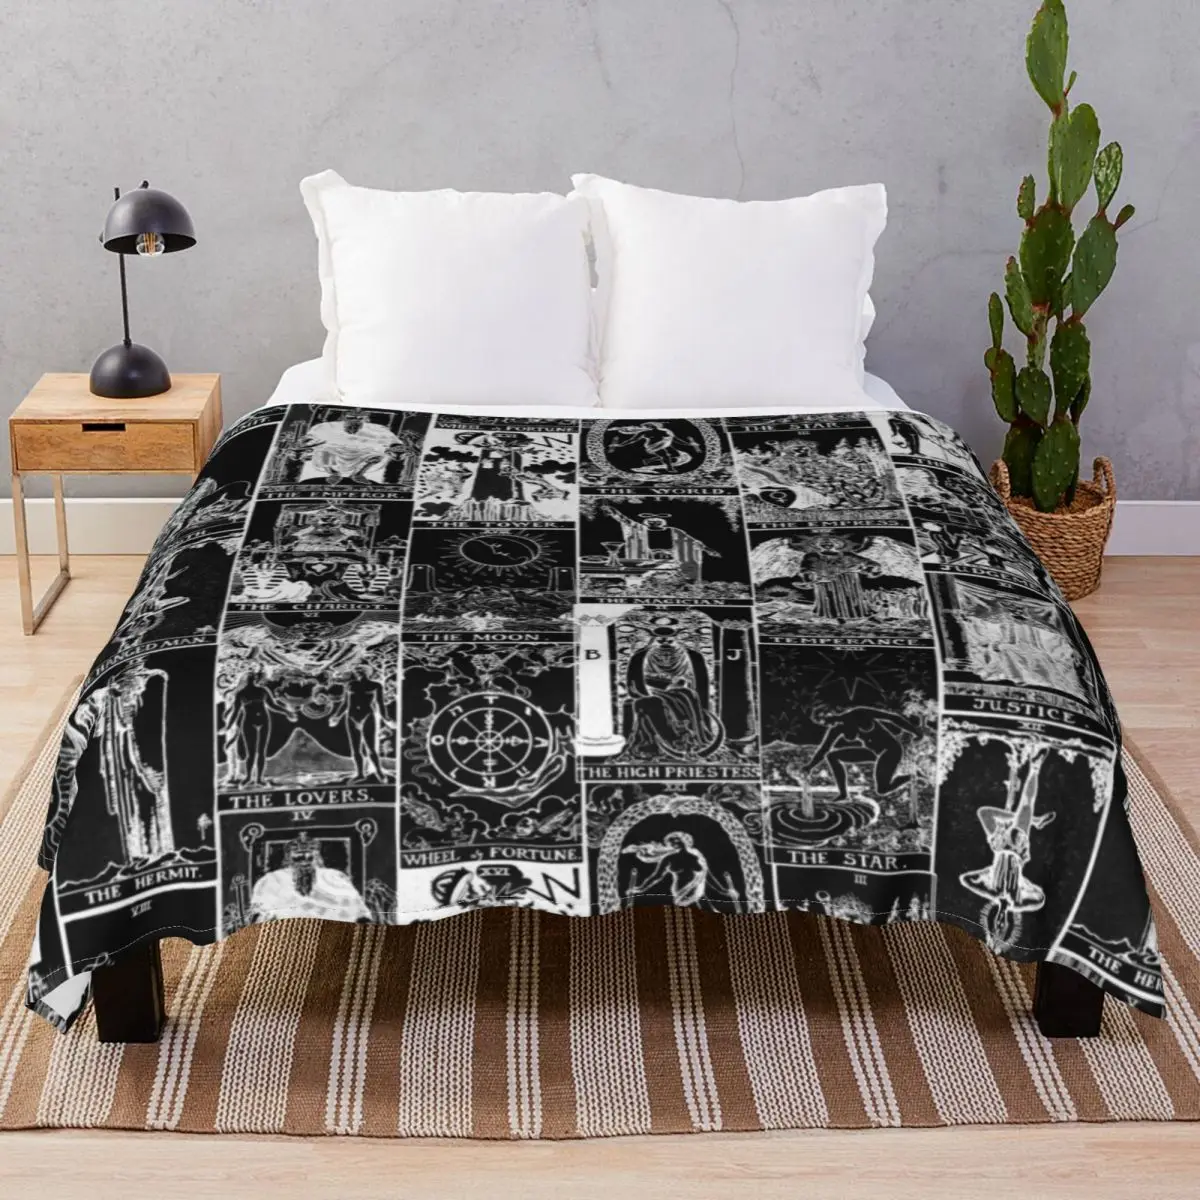 Tarot Patchwork Blankets Flannel All Season Multi-function Throw Blanket for Bed Sofa Camp Cinema